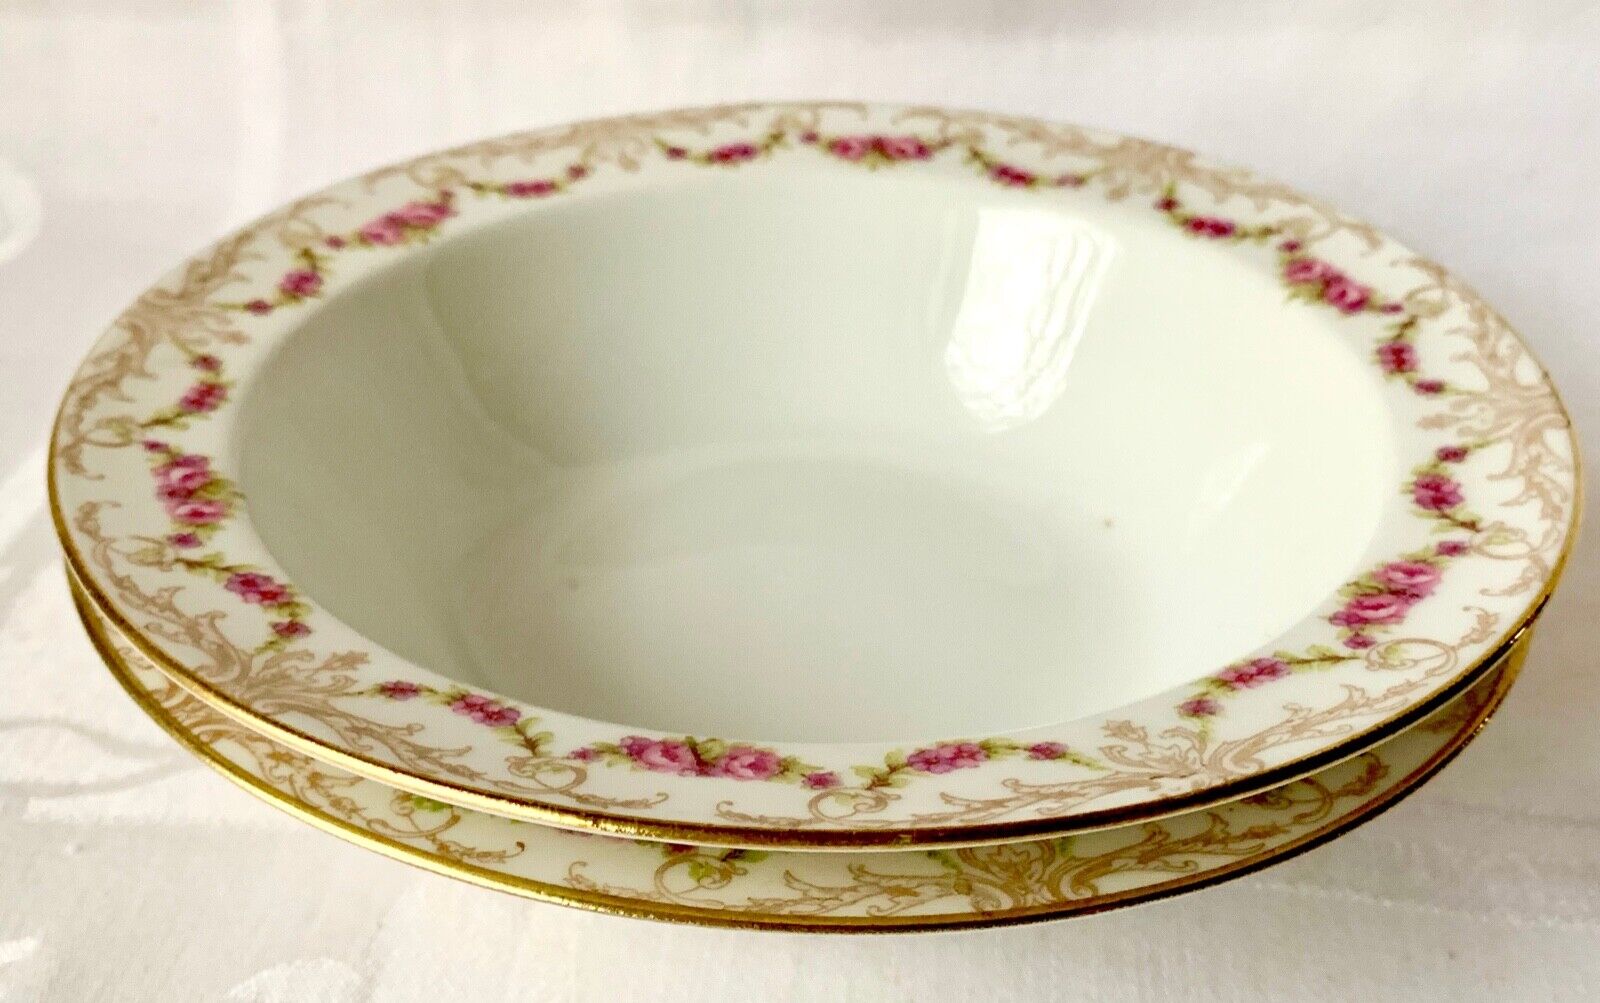 TWO LOVELY c1900 B&D BAWO & DOTTER ELITE LIMOGES BOWLS, PINK ROSES, SWAGS